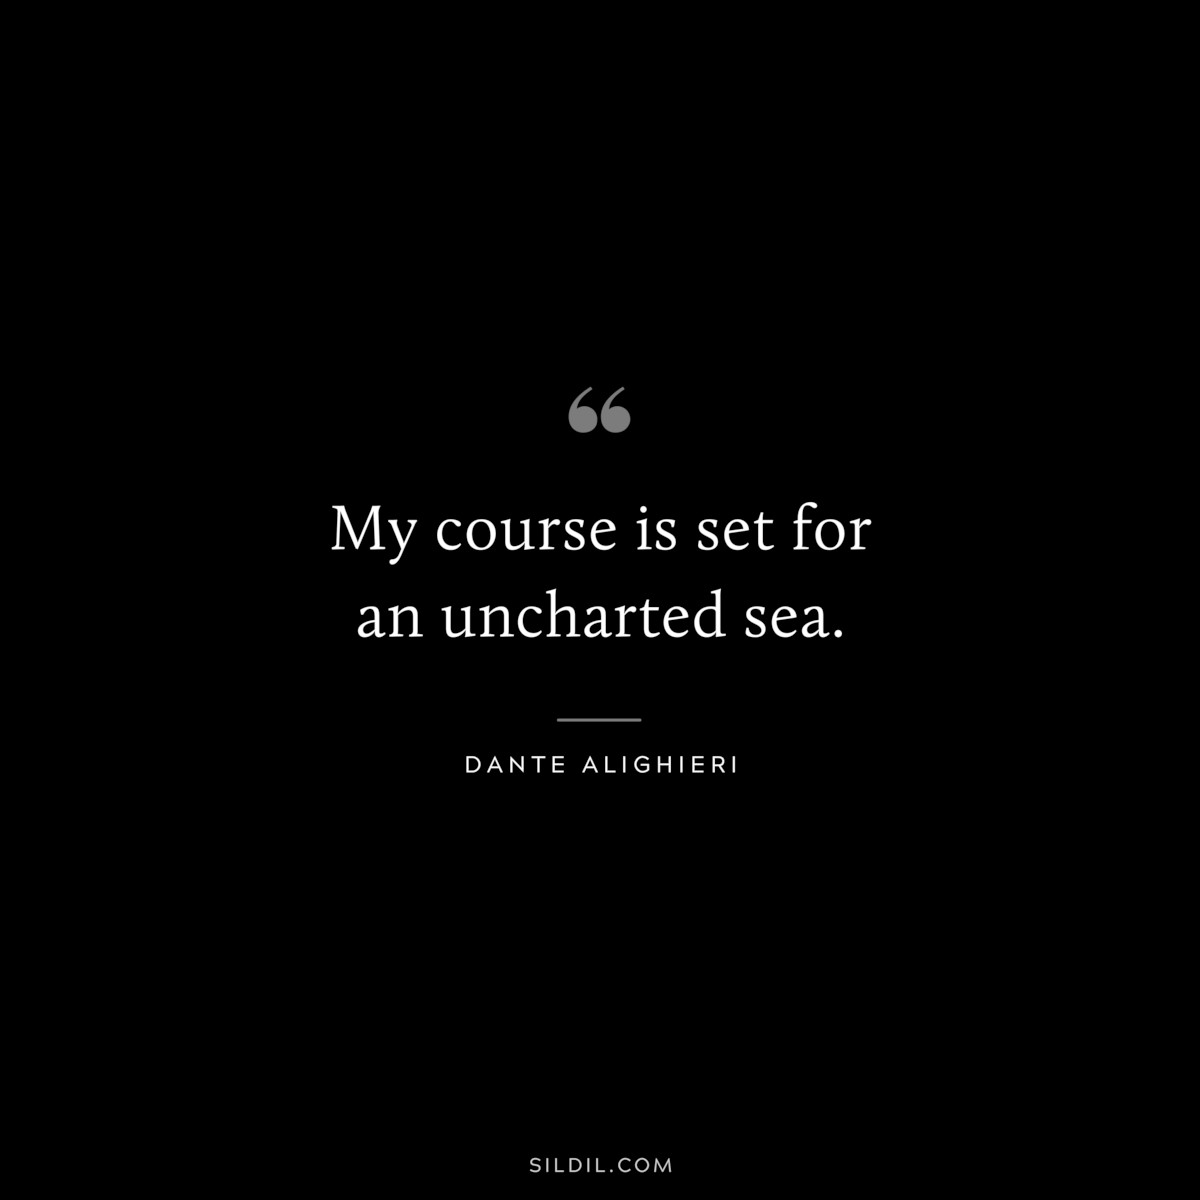 My course is set for an uncharted sea. ― Dante Alighieri